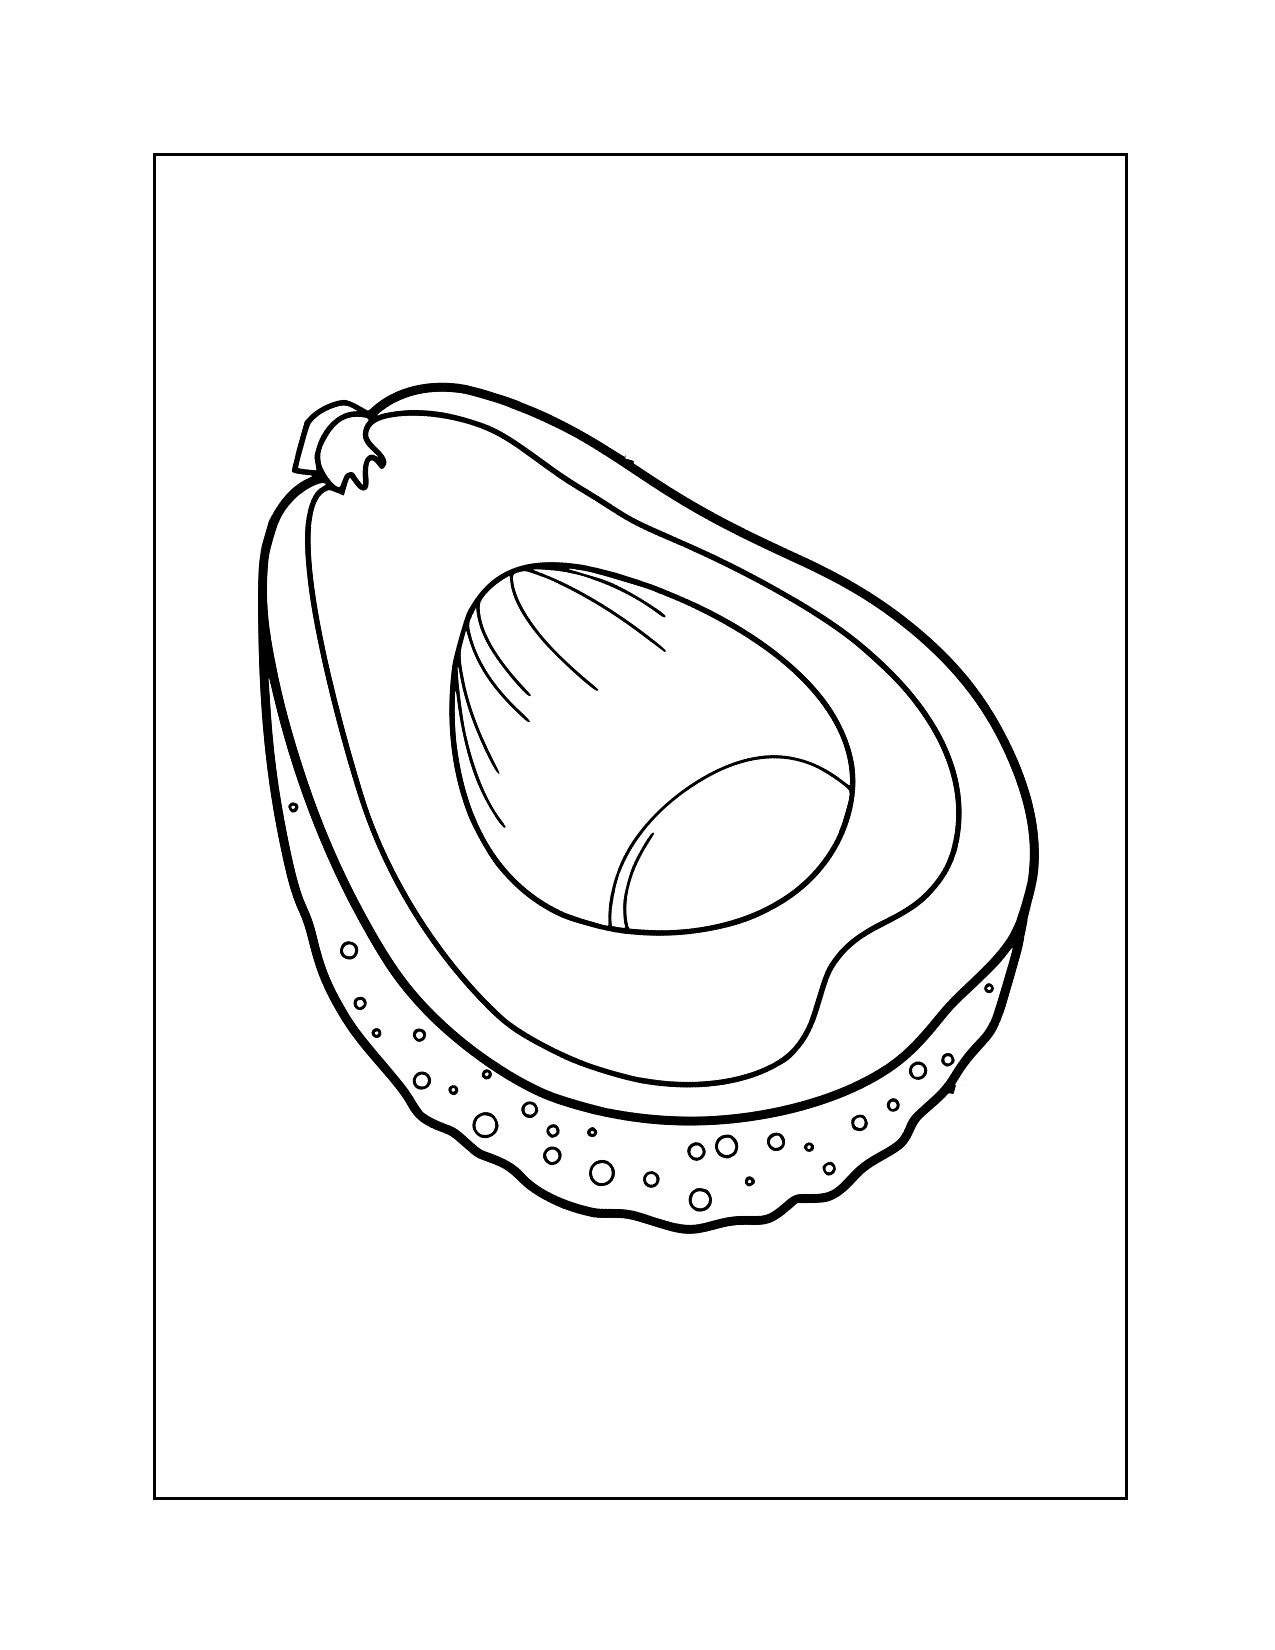 Avocado Half With Pit Coloring Page